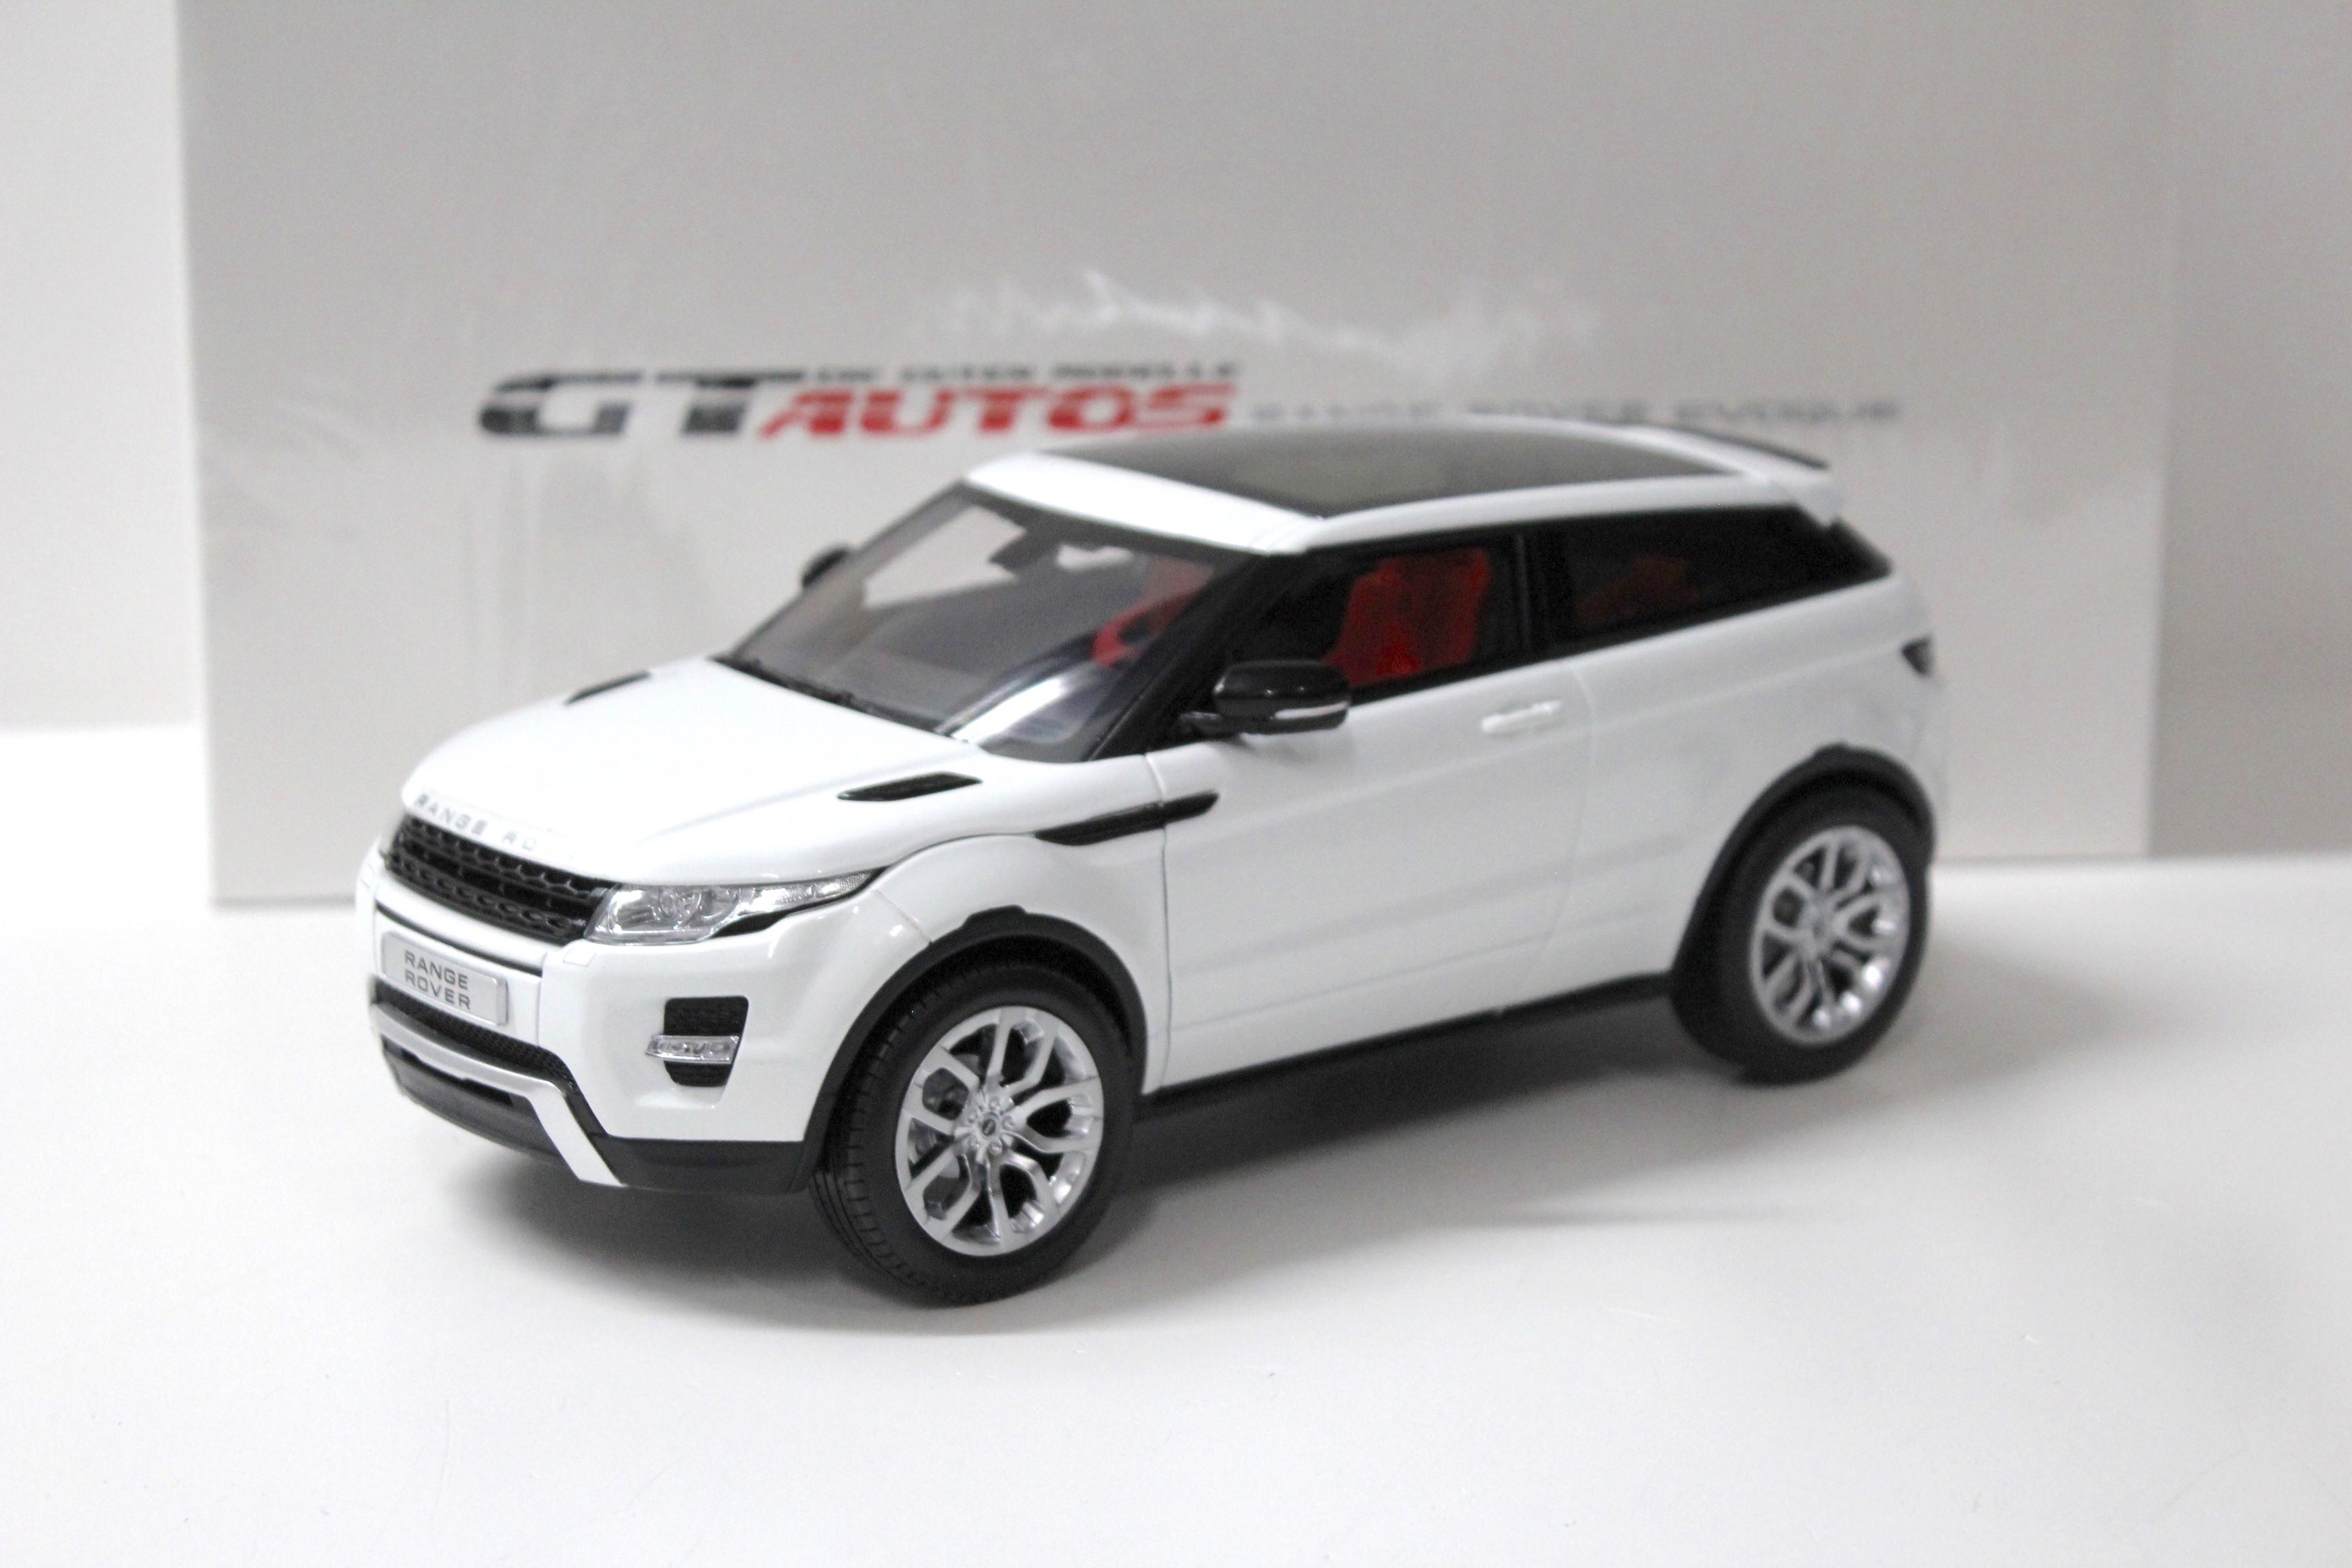 1:18 Welly GTA Range Rover Evoque white with Roof 2011 DEALER VERSION